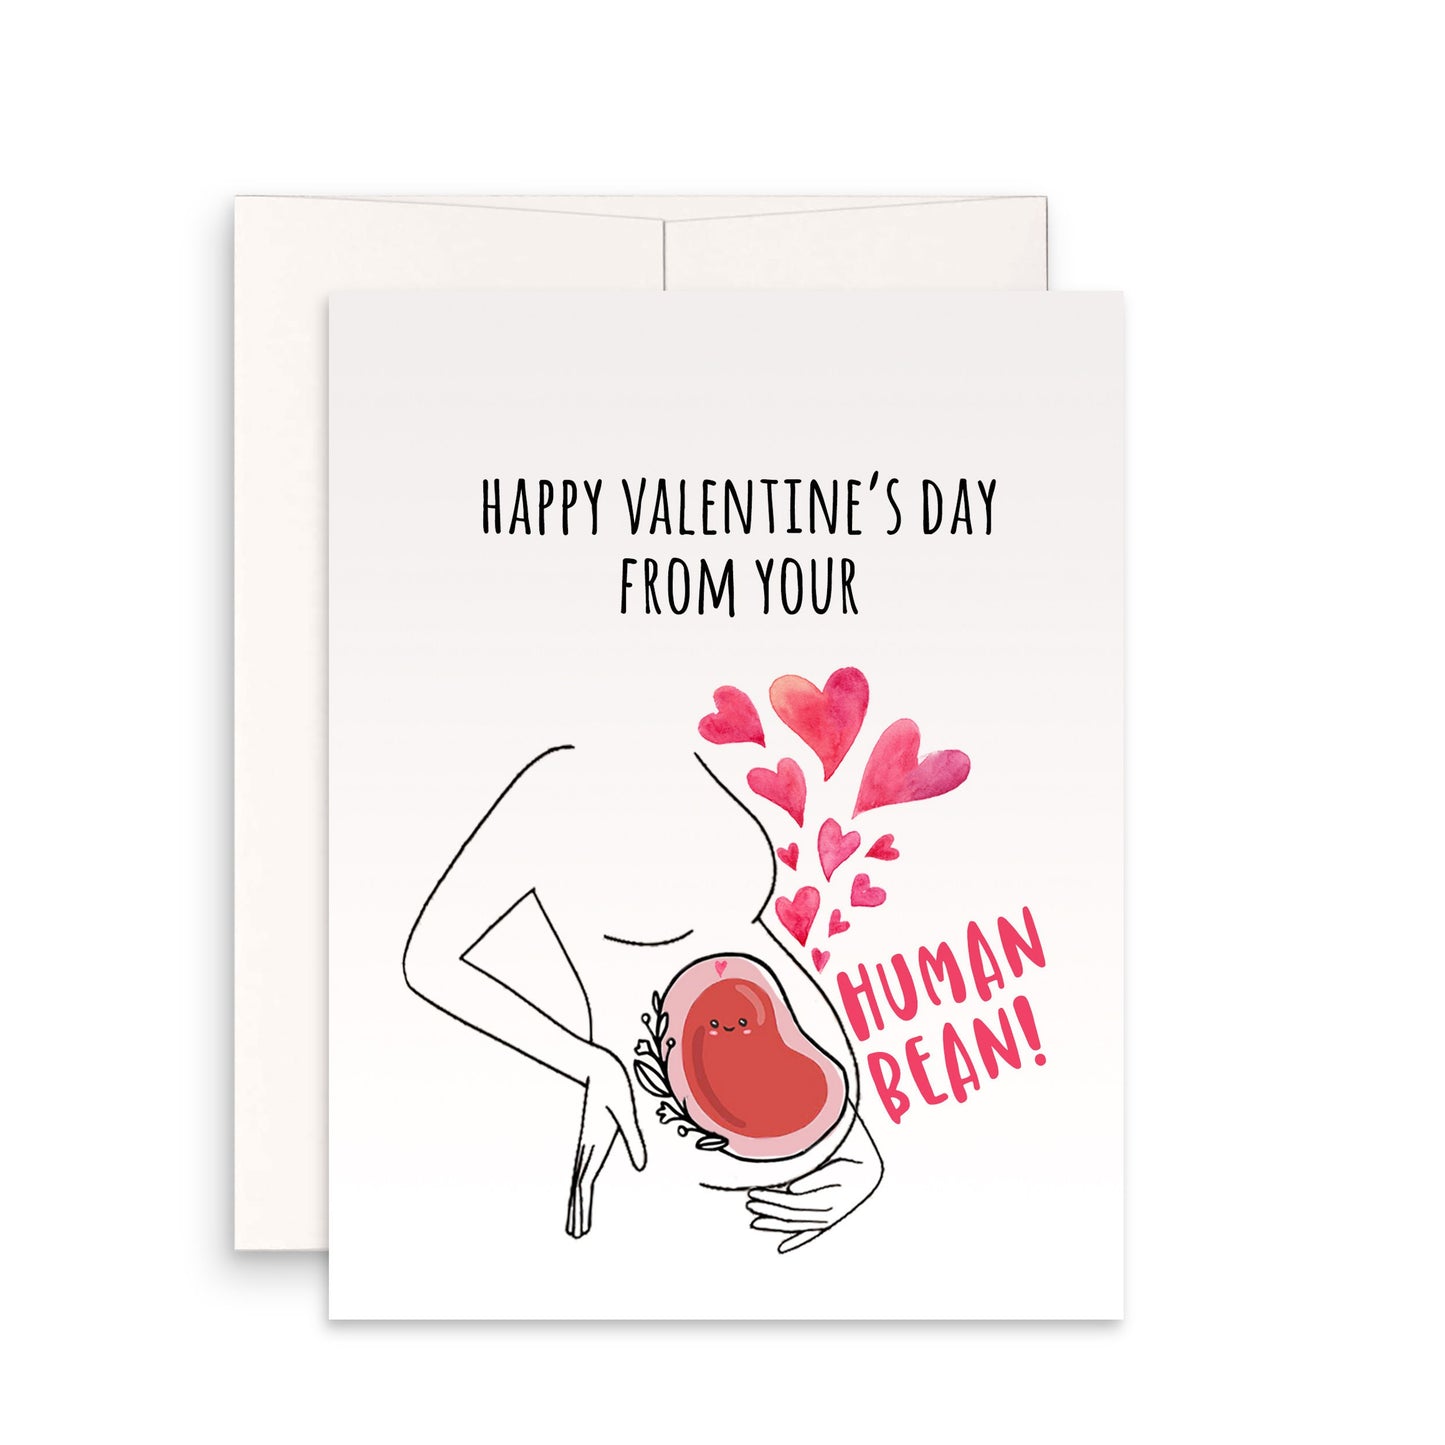 Pregnant Mom To Be Valentines Card For Husband - Expecting Dad Valentines Day Gift From Wife - Lil Human Bean Baby Cards